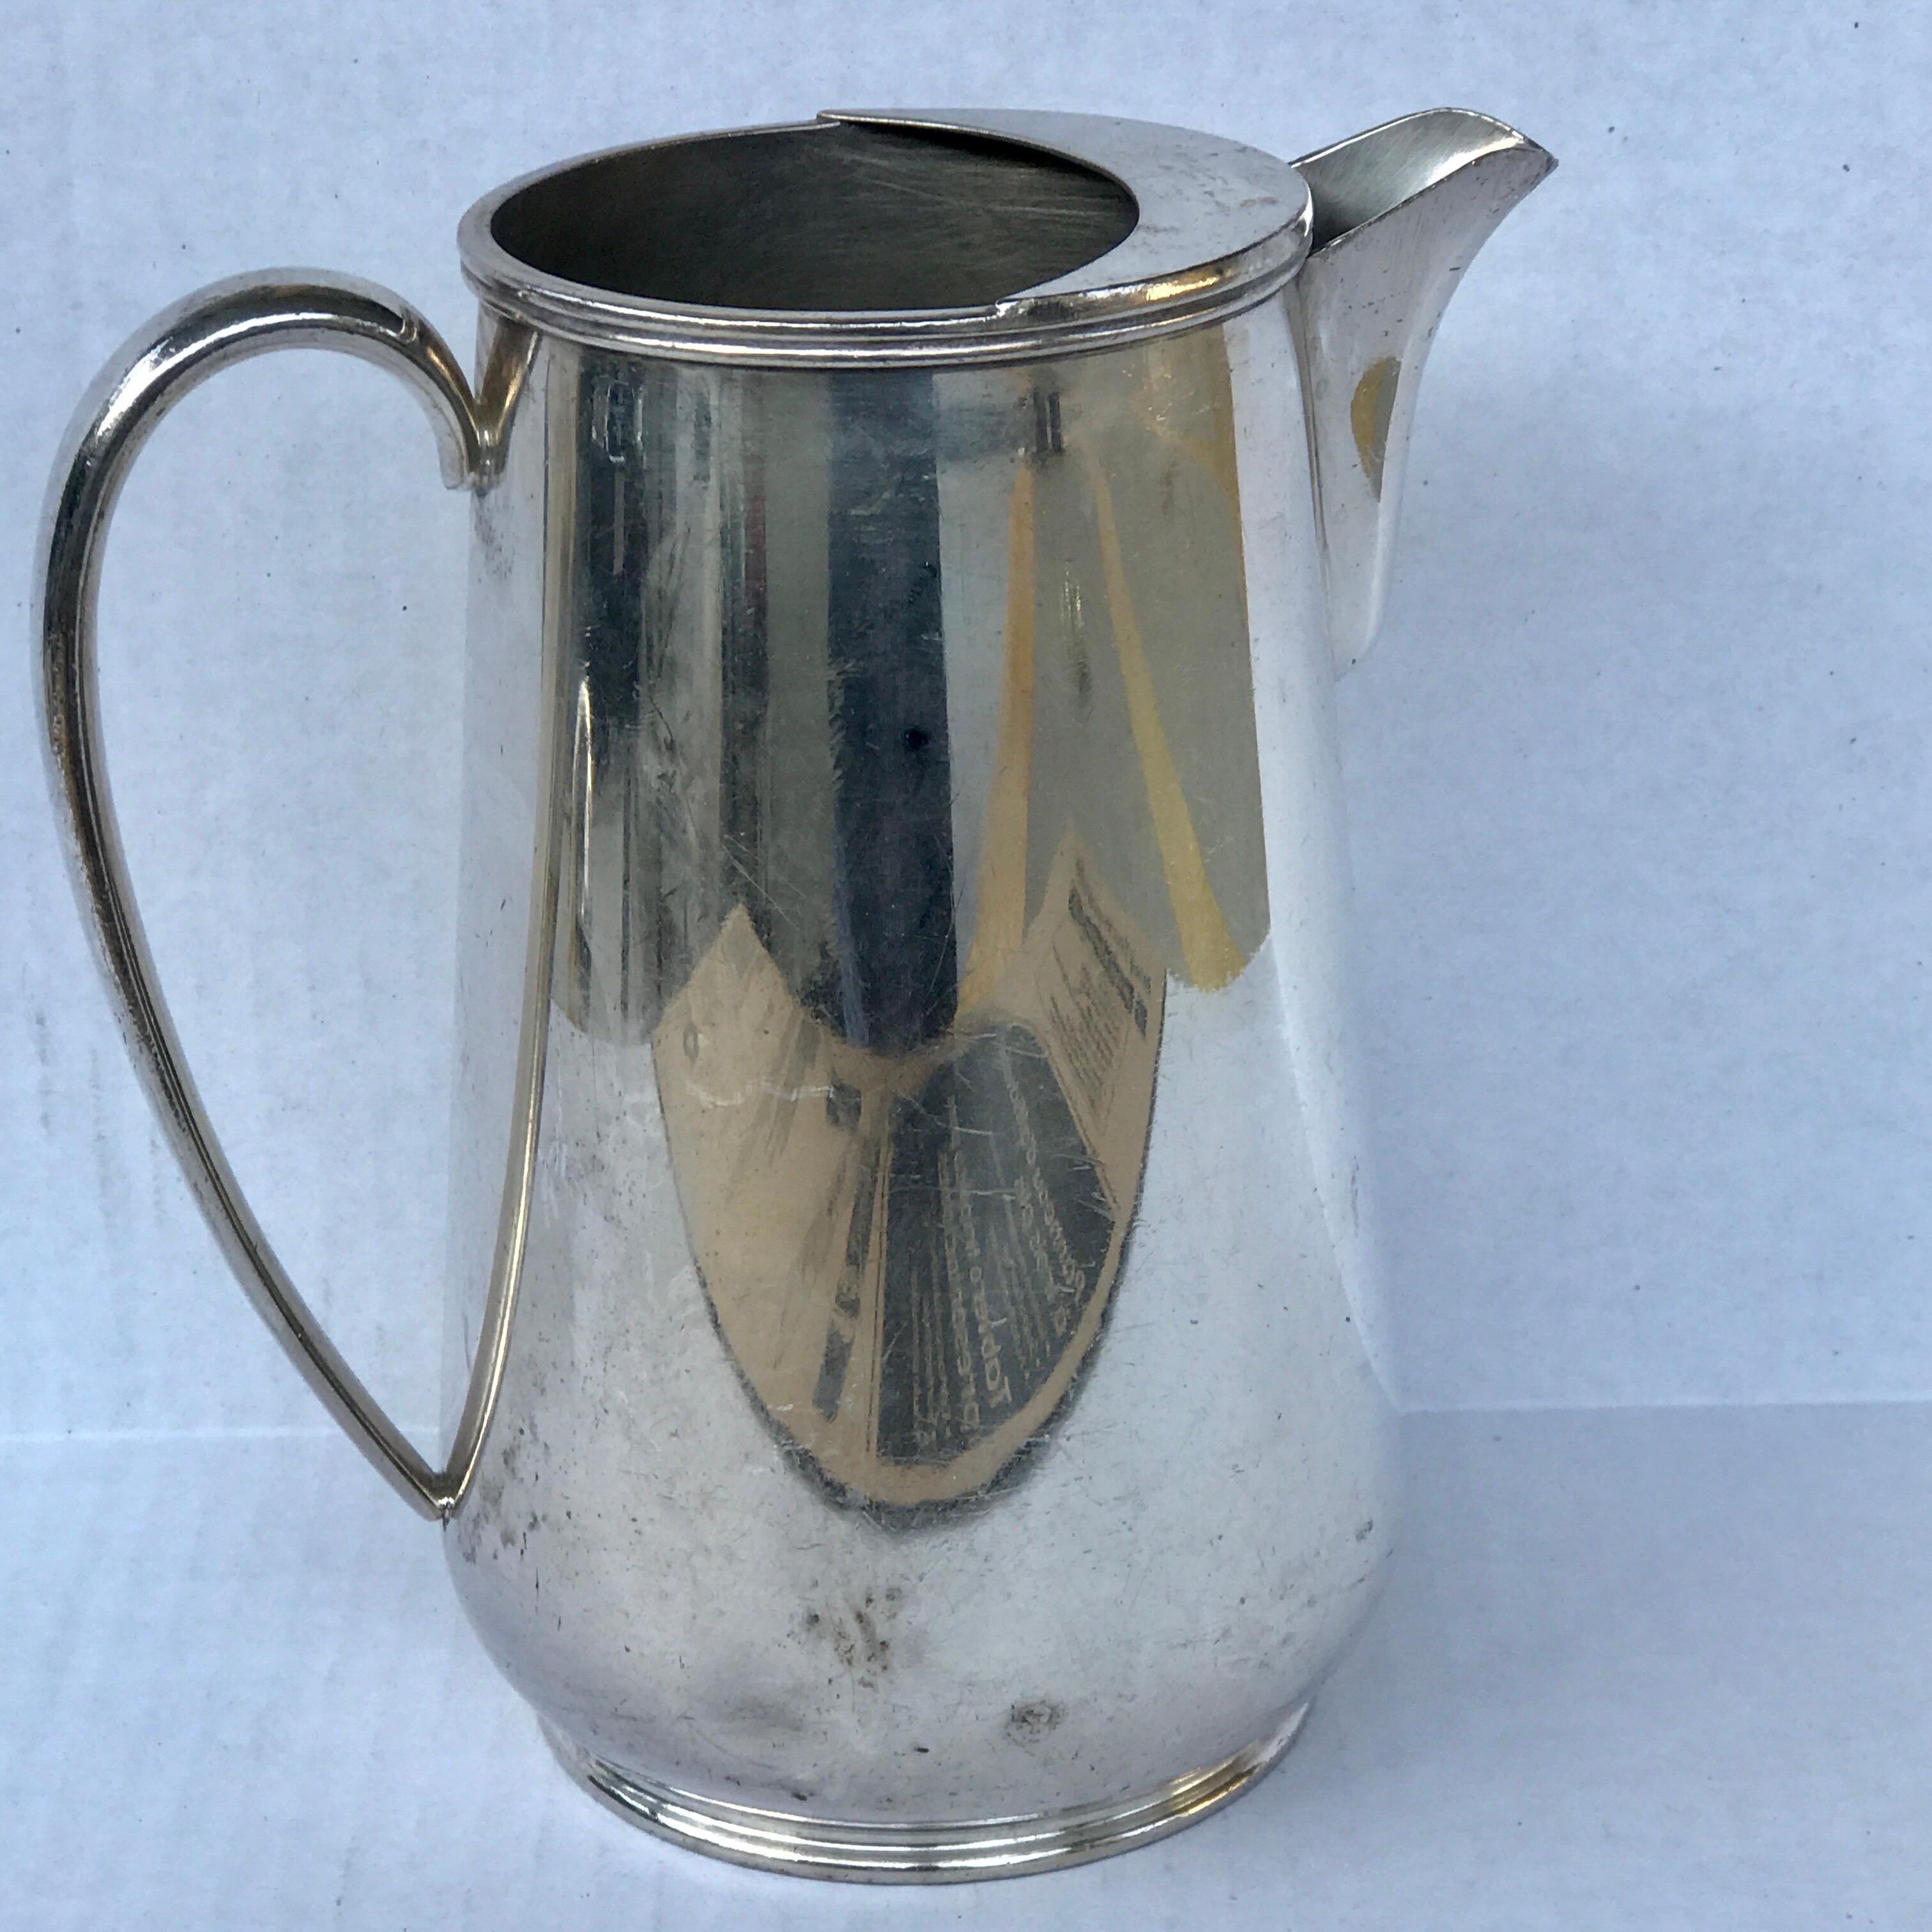 Vintage hotel silver plated water pitcher, with splash guard, stamped International E.P.N.S Japan , great distressed patina and wear, minor dents, no structural issues presents beautifully.

 